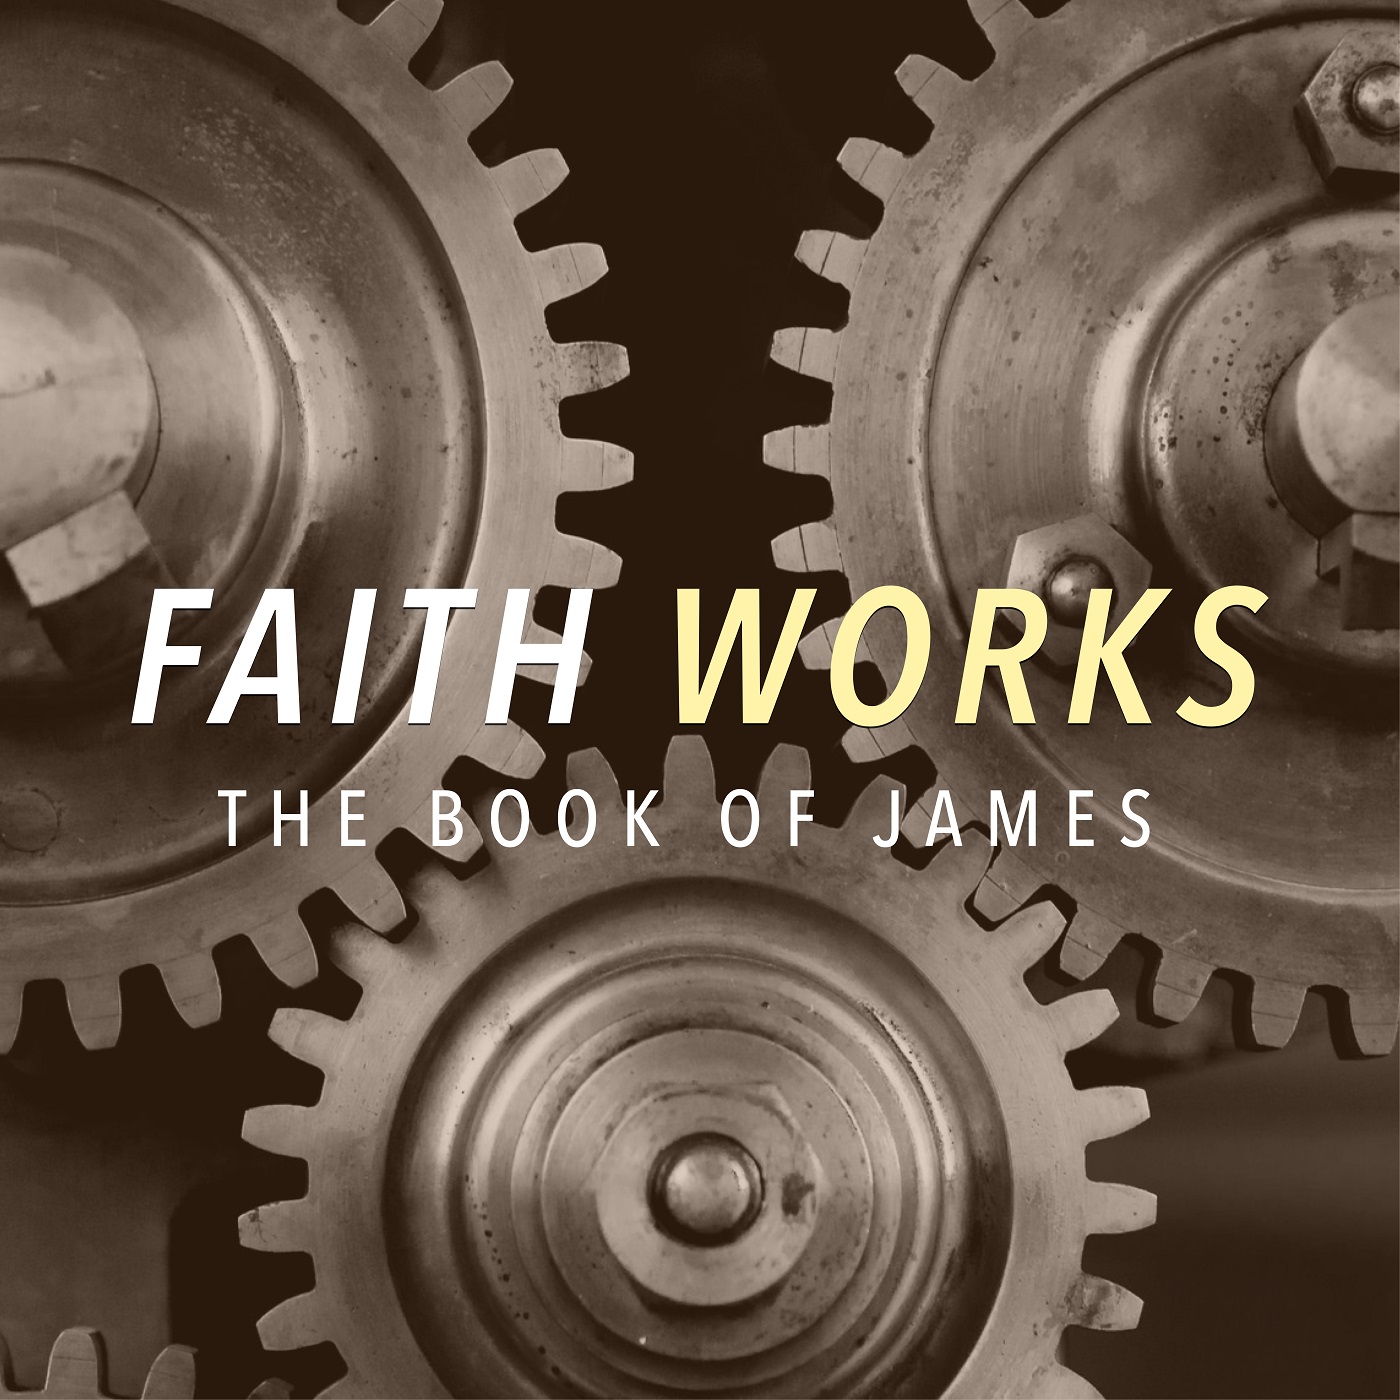 Faith Works: Winning the Battle, but Losing the War